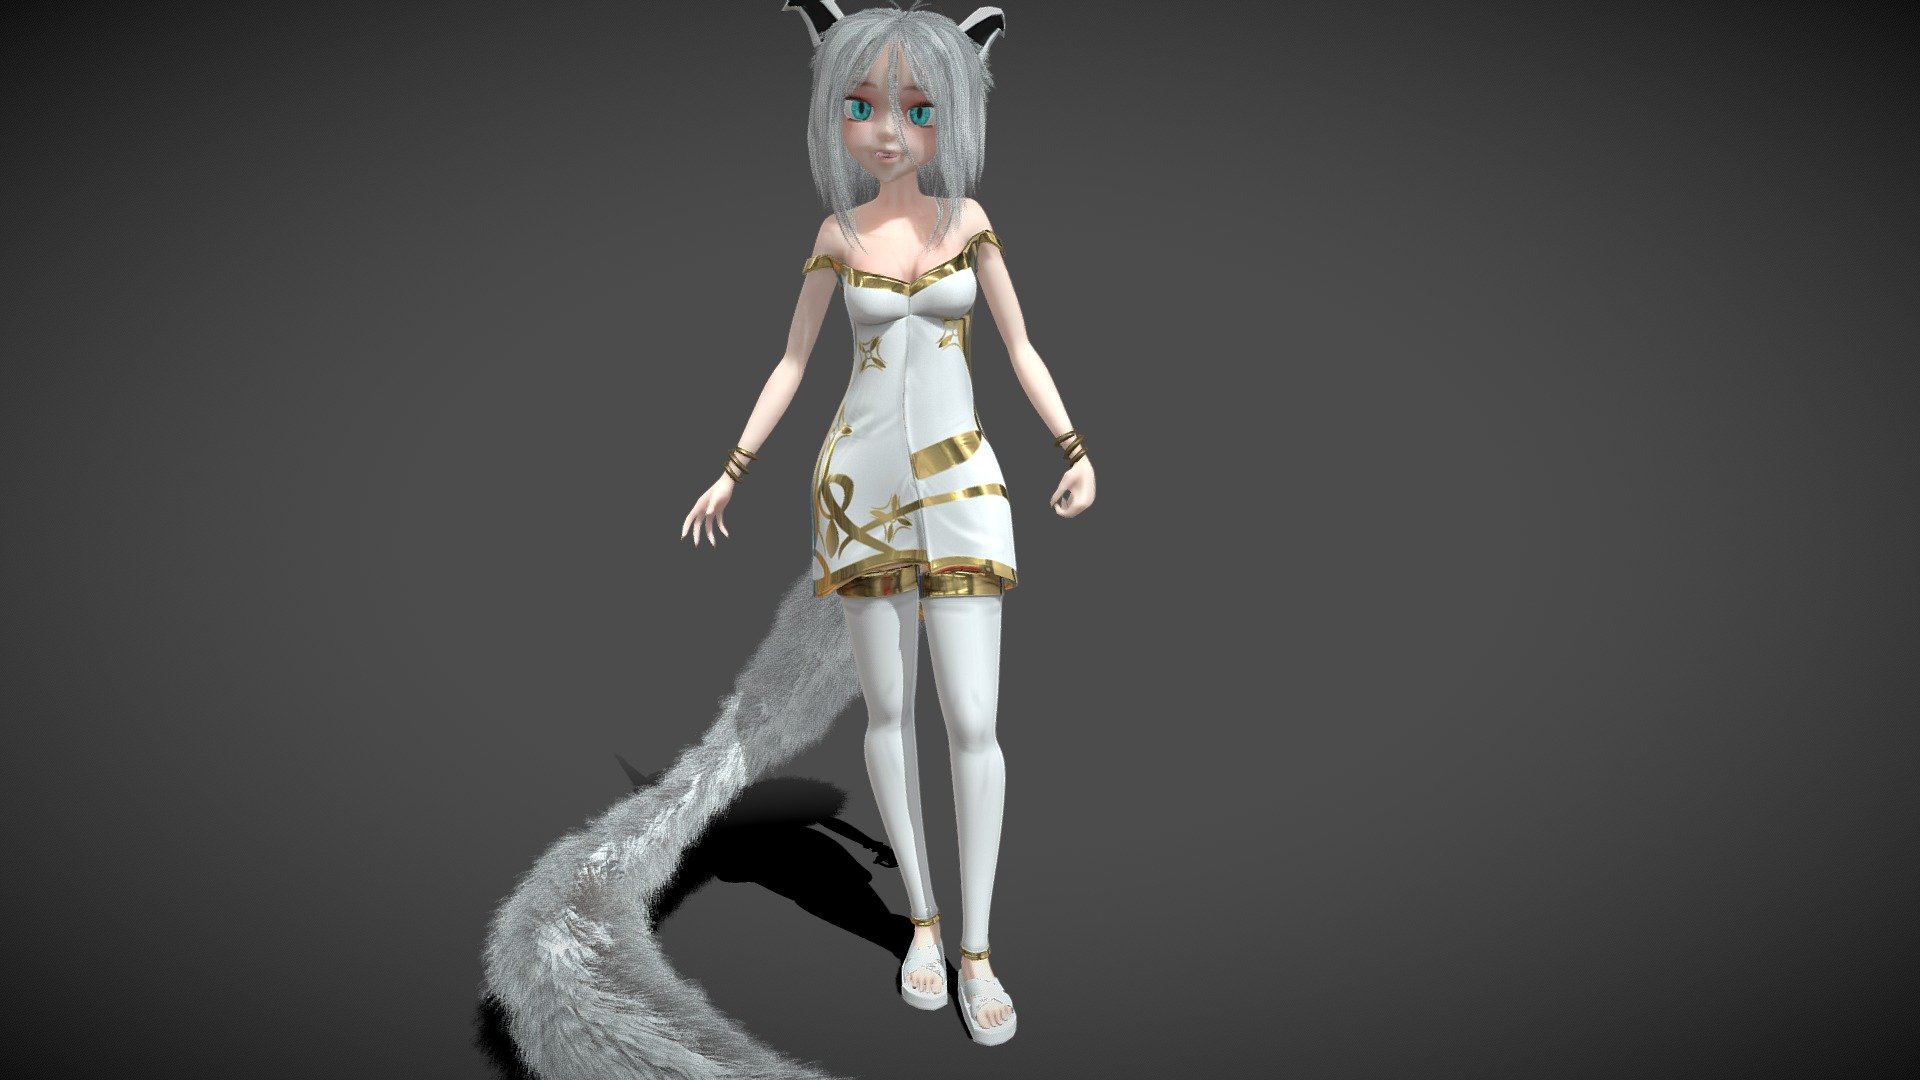 Fox Girl Cartoon

-----------Blender 3.0-----------------




has bones, body, tail and ears

Mixamo skeleton

Mixamo rig add-on for Blender

It has simulation of cloth for the hair by default it is not active

does not include animation

No hdr lighting

54 face nShape Keys

-------------Fbx ---------------




Lowpoly Polys :31.858 Verts: 50.509

Mixamo skeleton

does not include animation

-----------4K Textures------------




6 Materials with

diffuse , roughness, metallic, normal

Videos:
https://youtu.be/ItWnzQnl_bk

https://youtu.be/r-RvjSctFXM

Any questions or comments about the model, you can write to me. I will be happy to assist you :) - Fox Girl Cartoon_V2 - Buy Royalty Free 3D model by 3D Figures (@3DFigures) 3d model